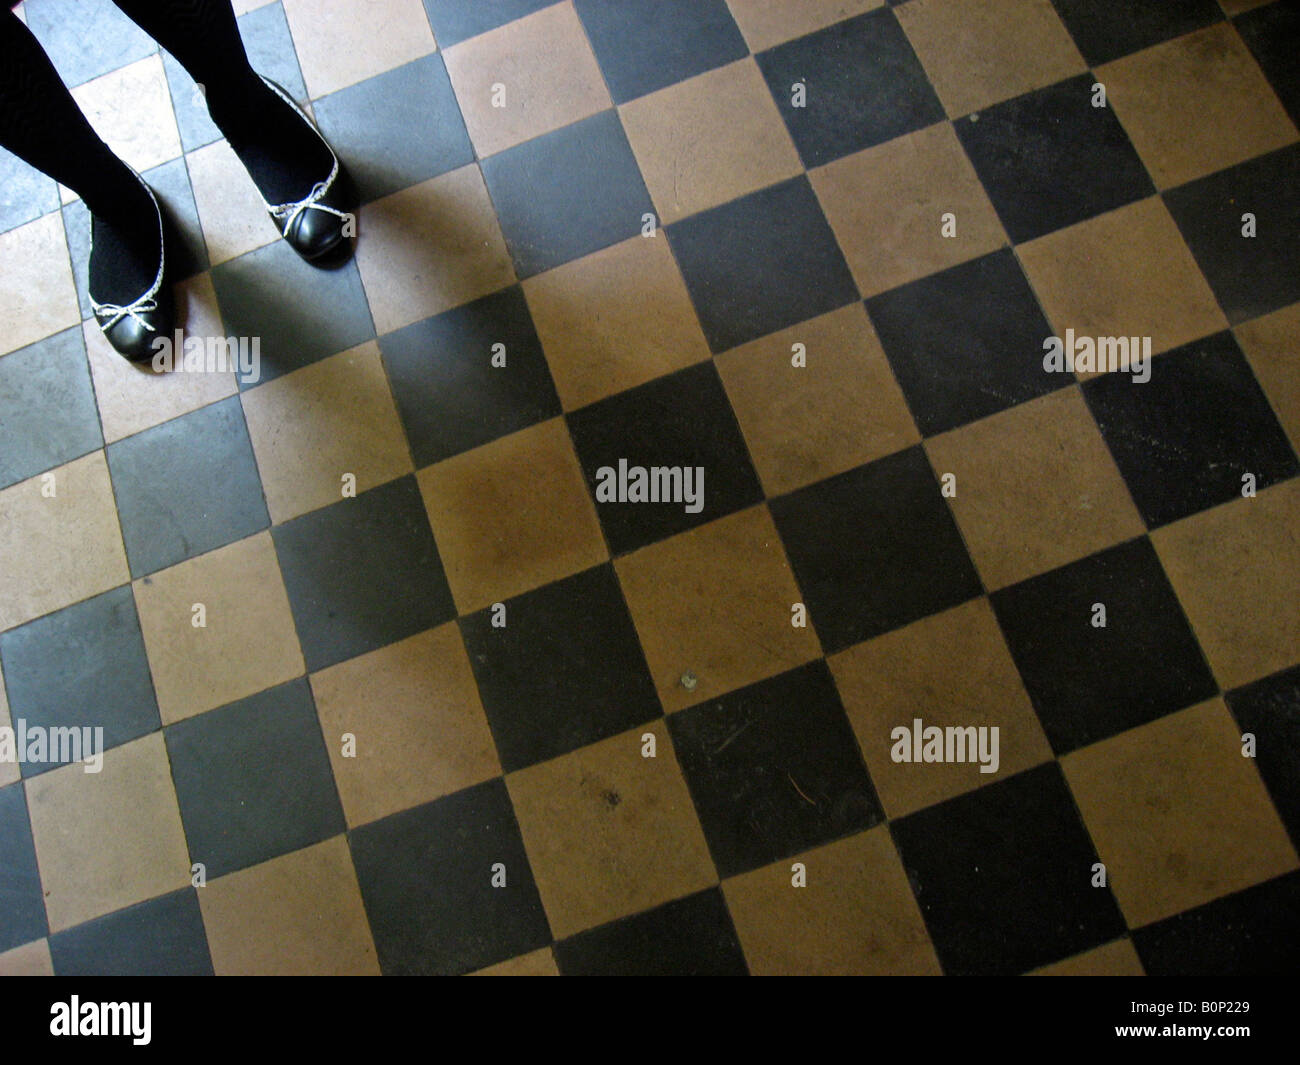 a girls feet stand on check tiled floor Stock Photo